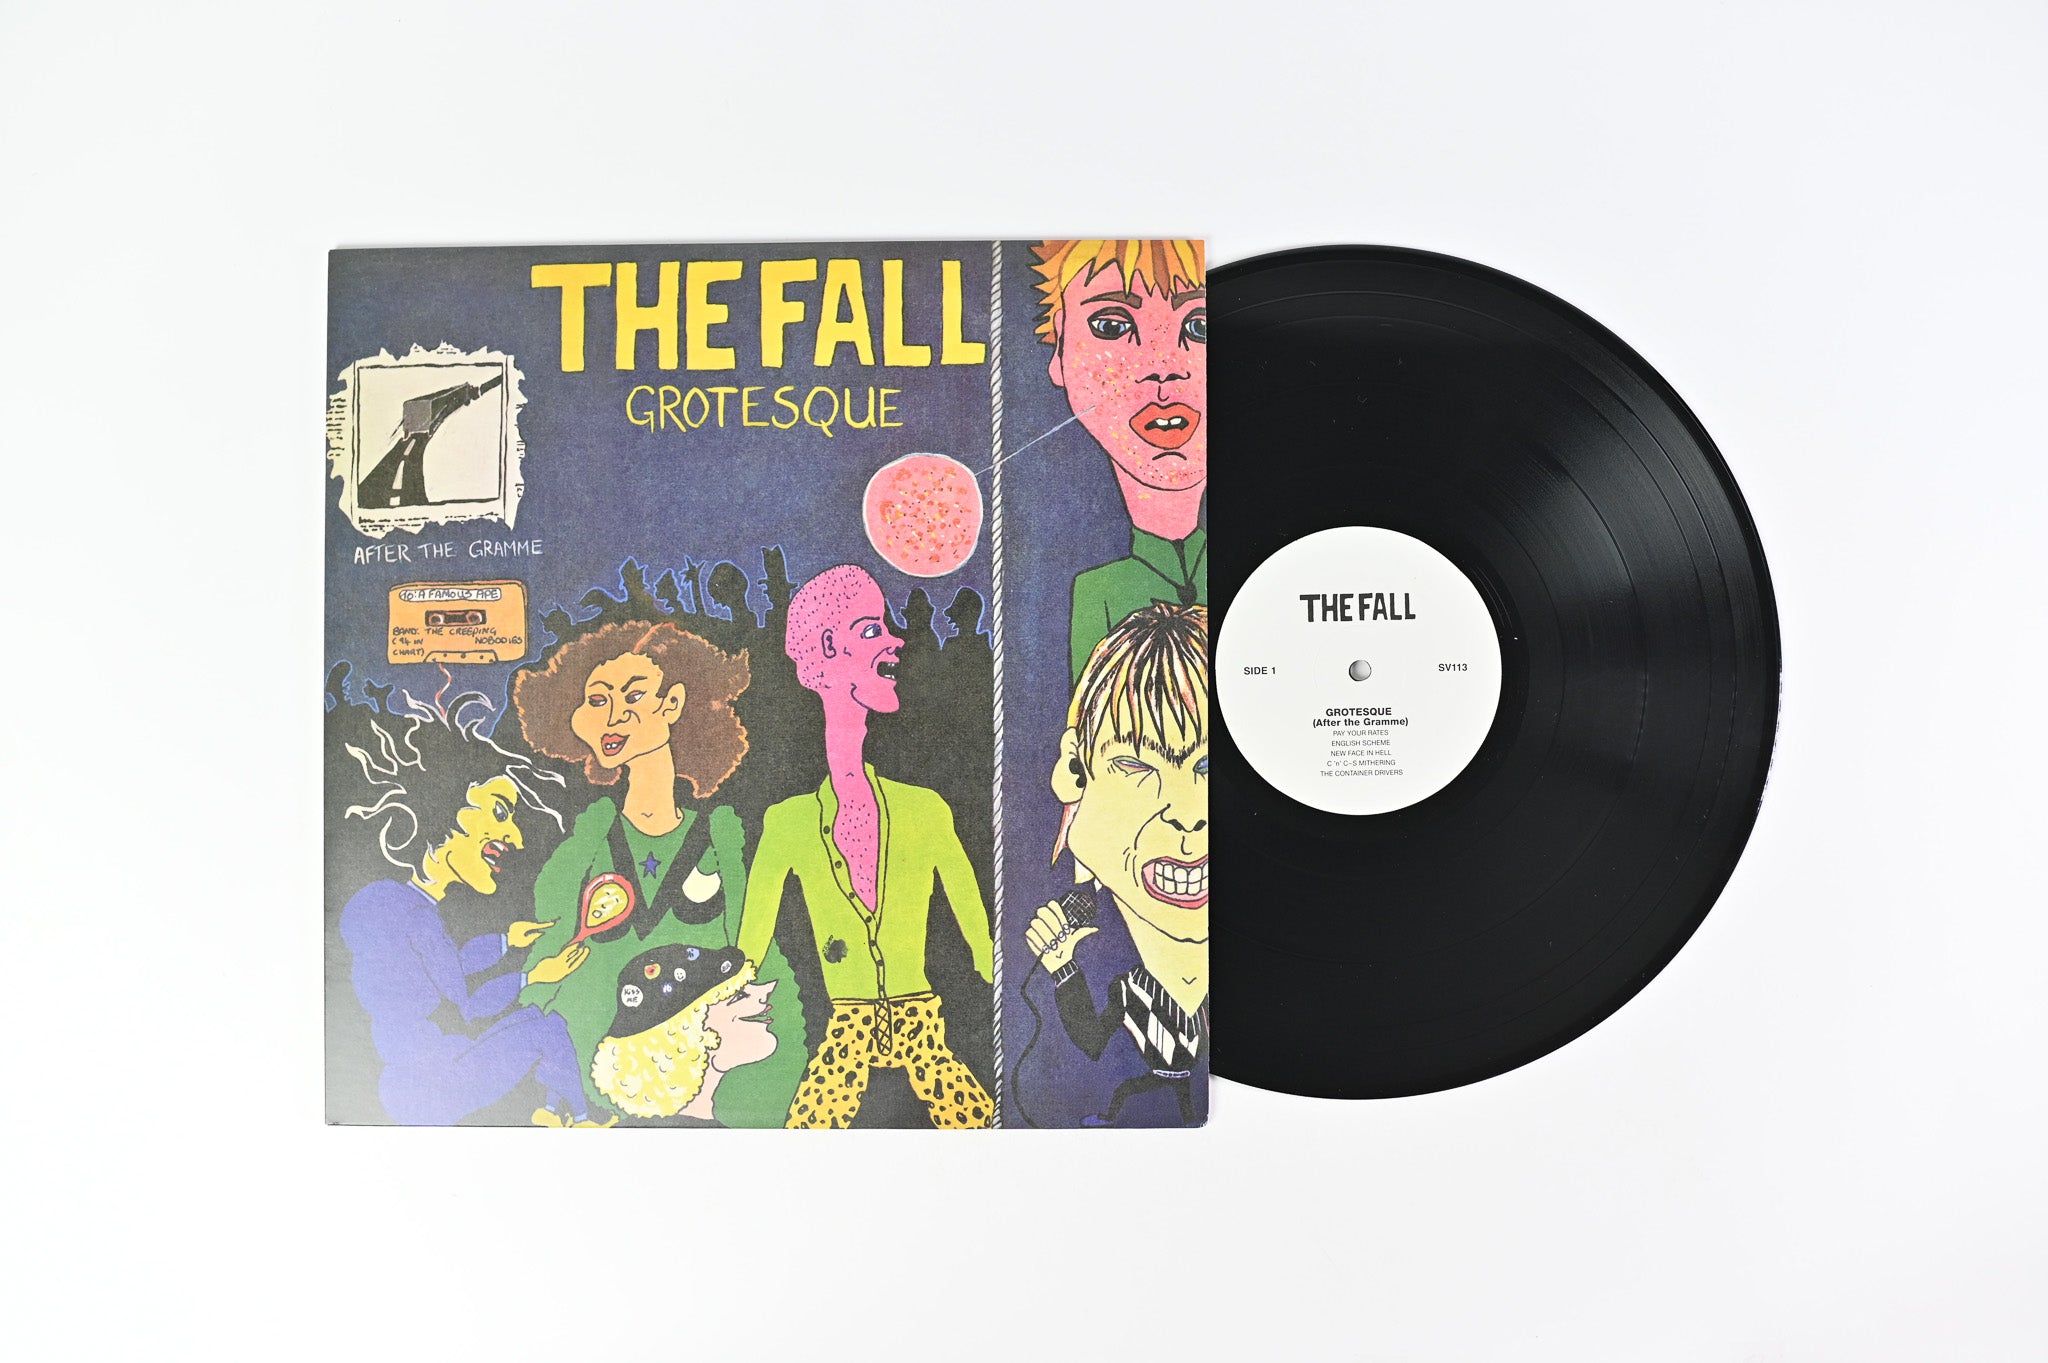 The Fall - Grotesque (After The Gramme) on Superior Viaduct Reissue